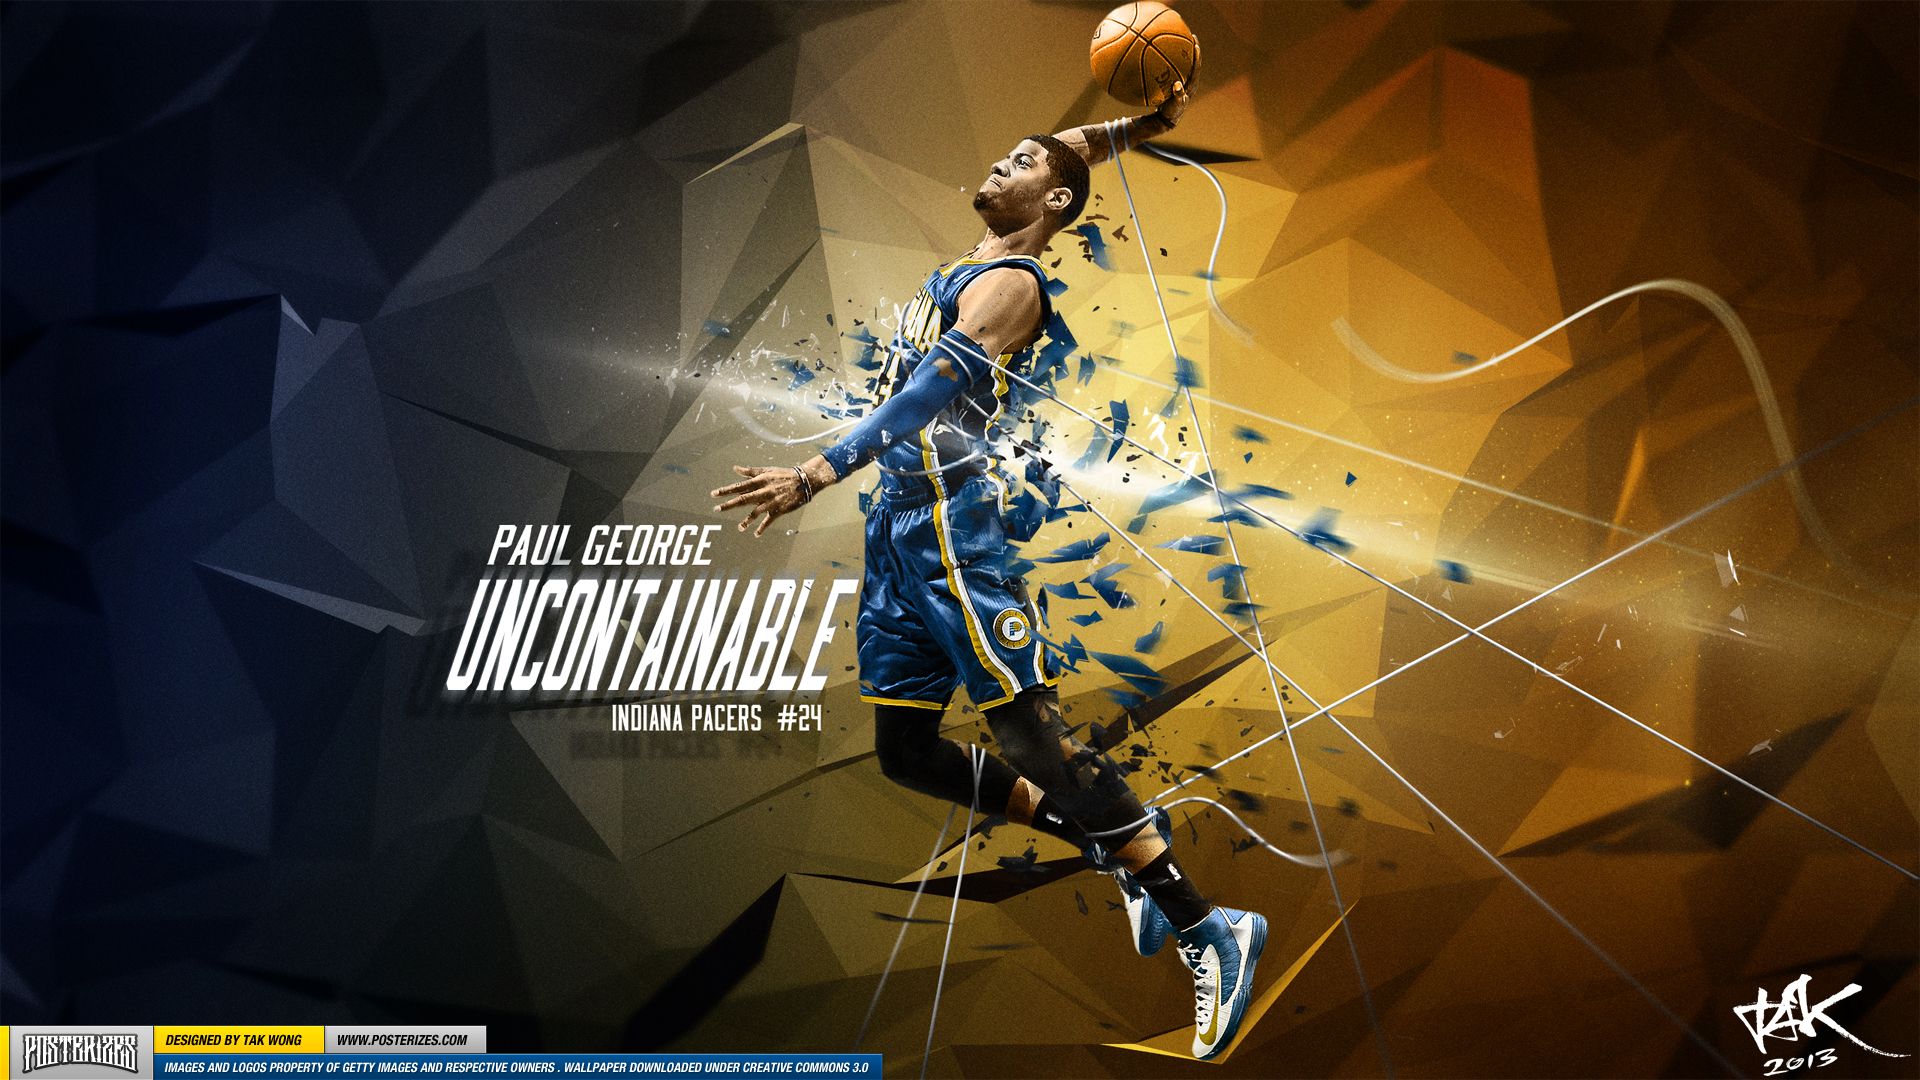 Paul George Uncontainable Wallpaper Posterizescom   NBA